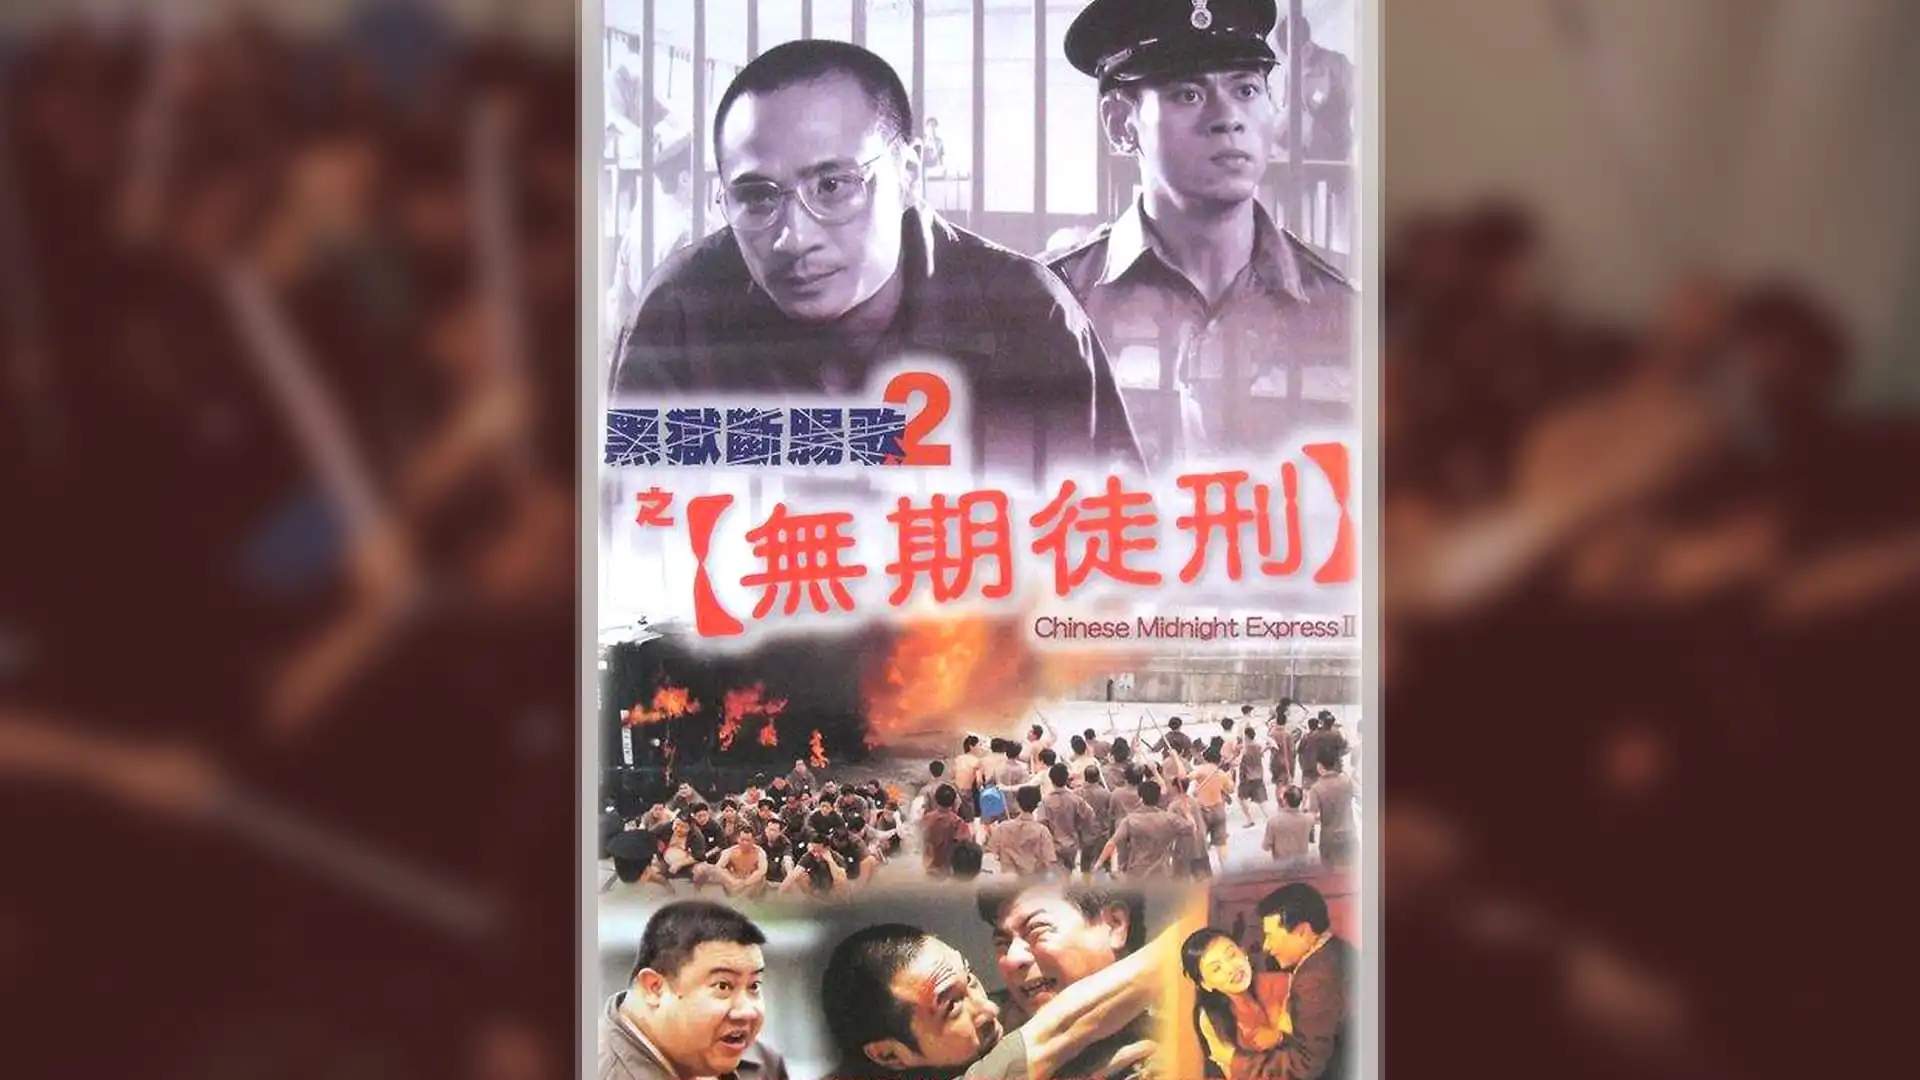 Watch and Download Chinese Midnight Express II 1